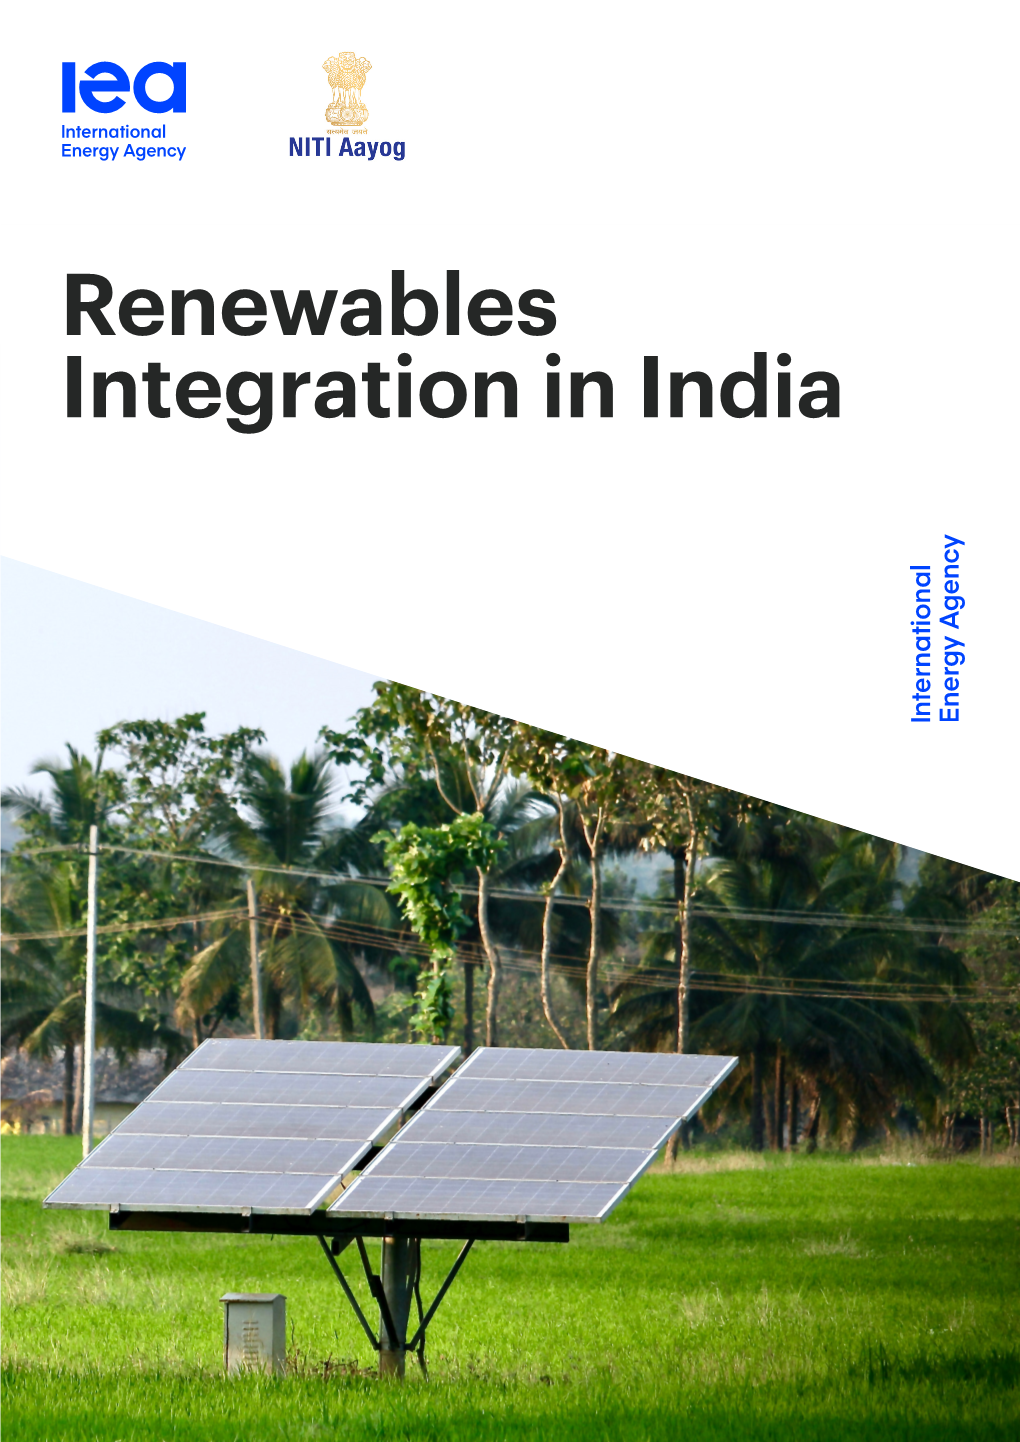 Renewables Integration in India 2021 Abstract